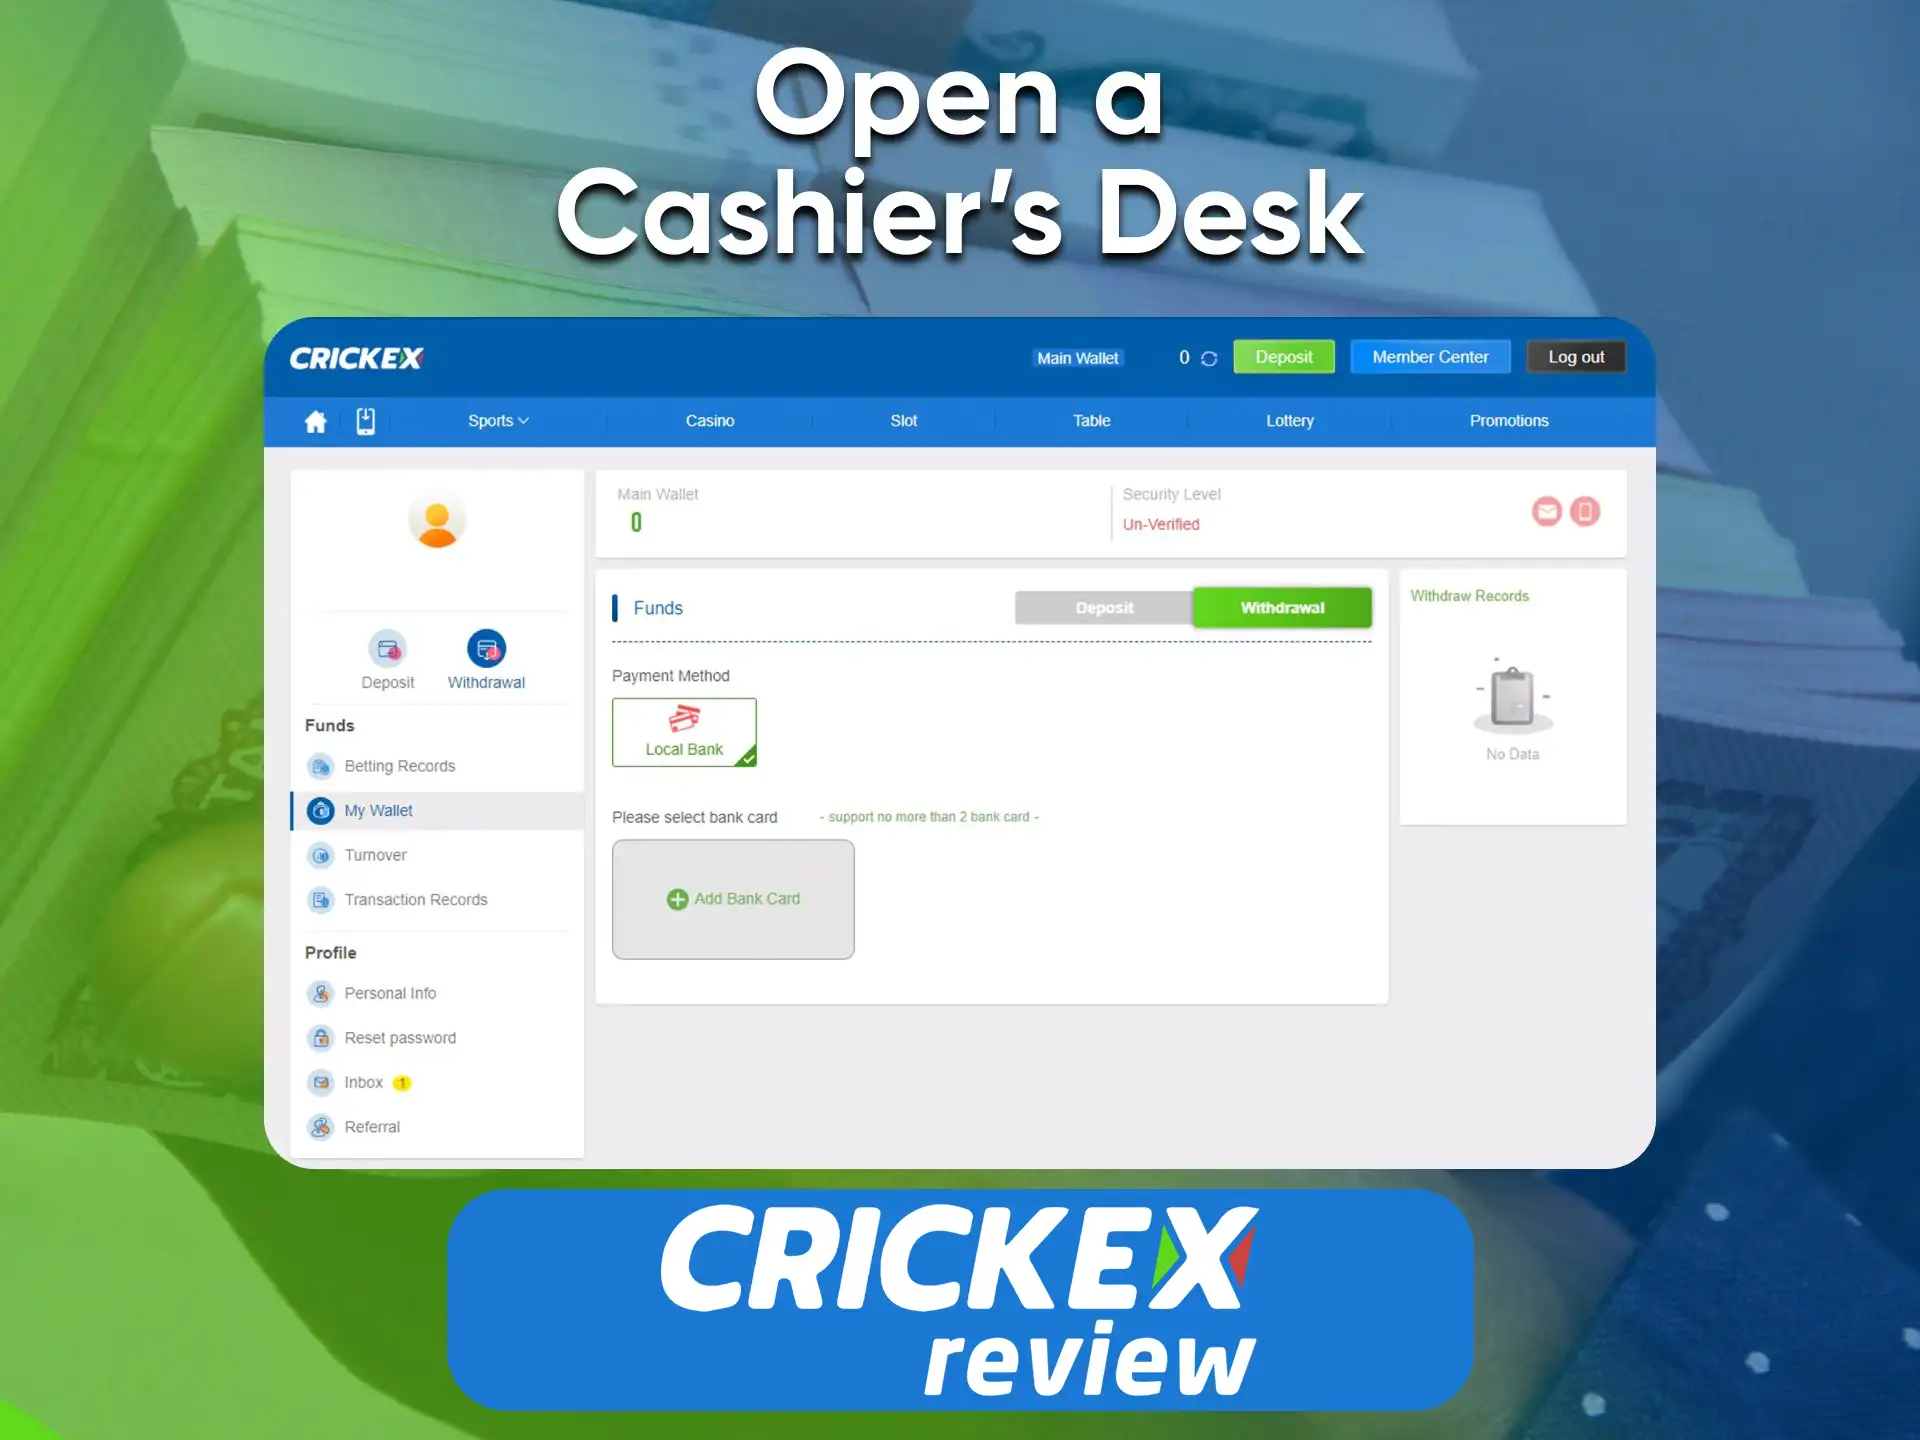 To withdraw funds, go to the appropriate section on the Crickex BD.